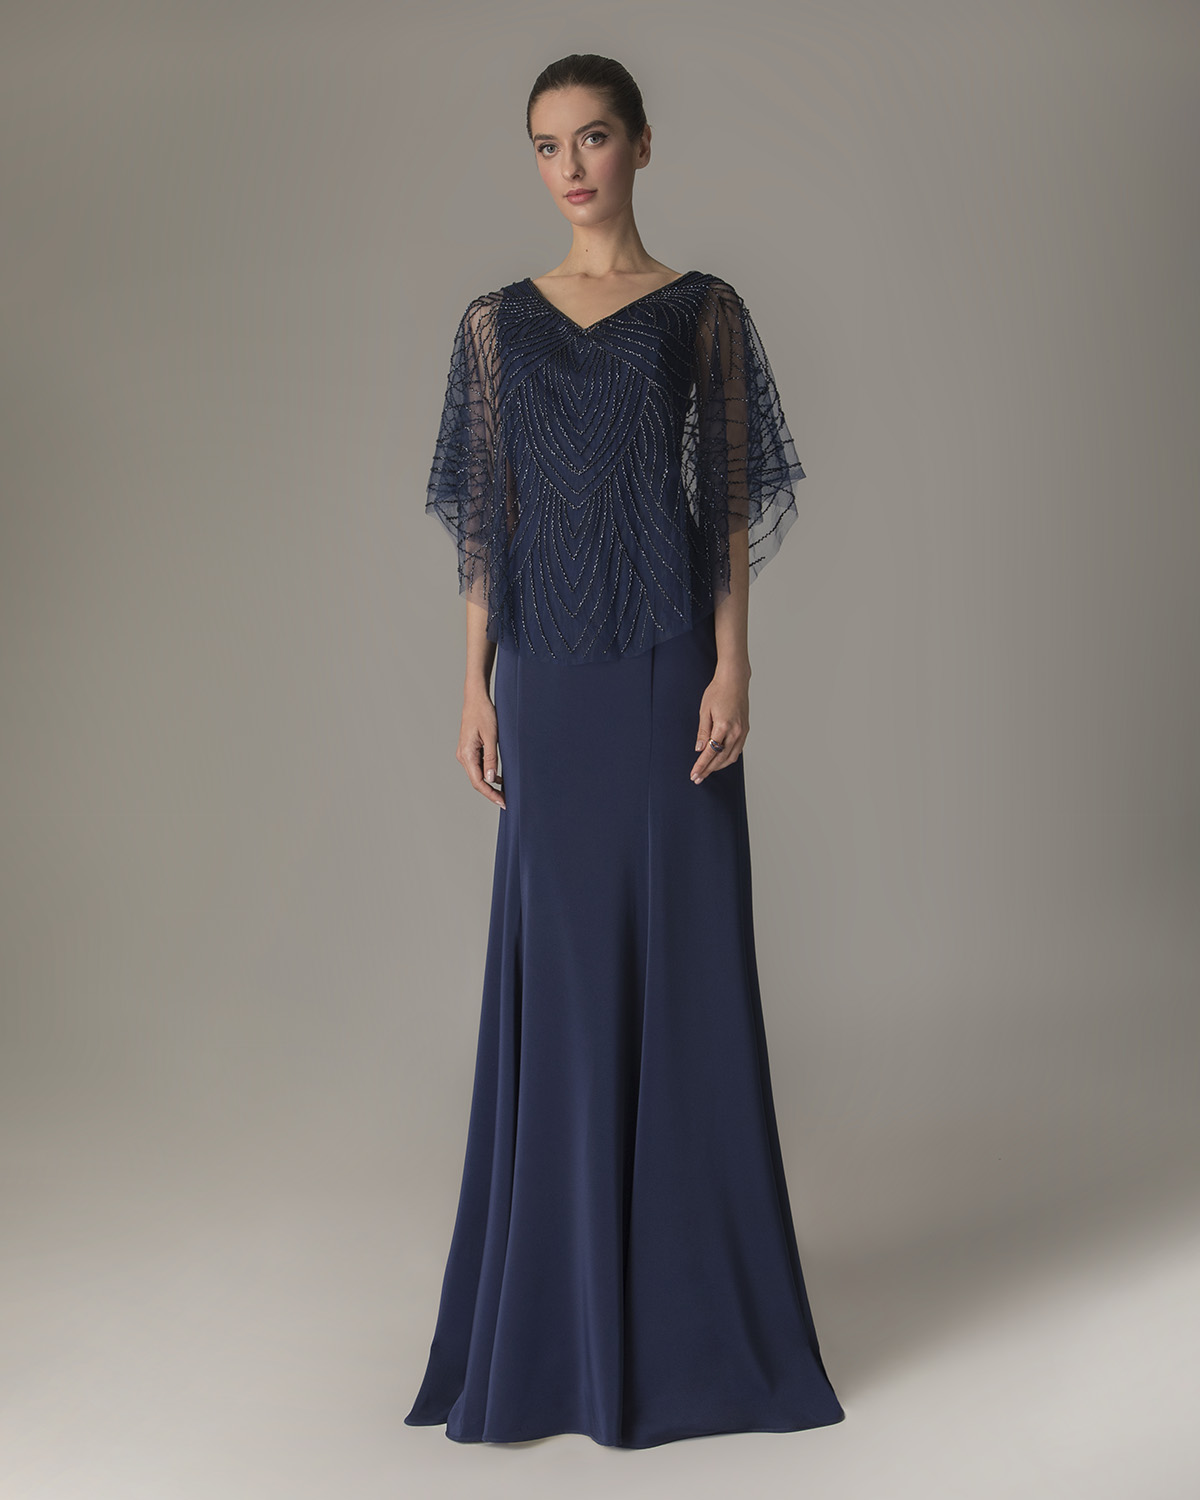 Classic Dresses / Long satin dress with beaded cape for the mother of the bride